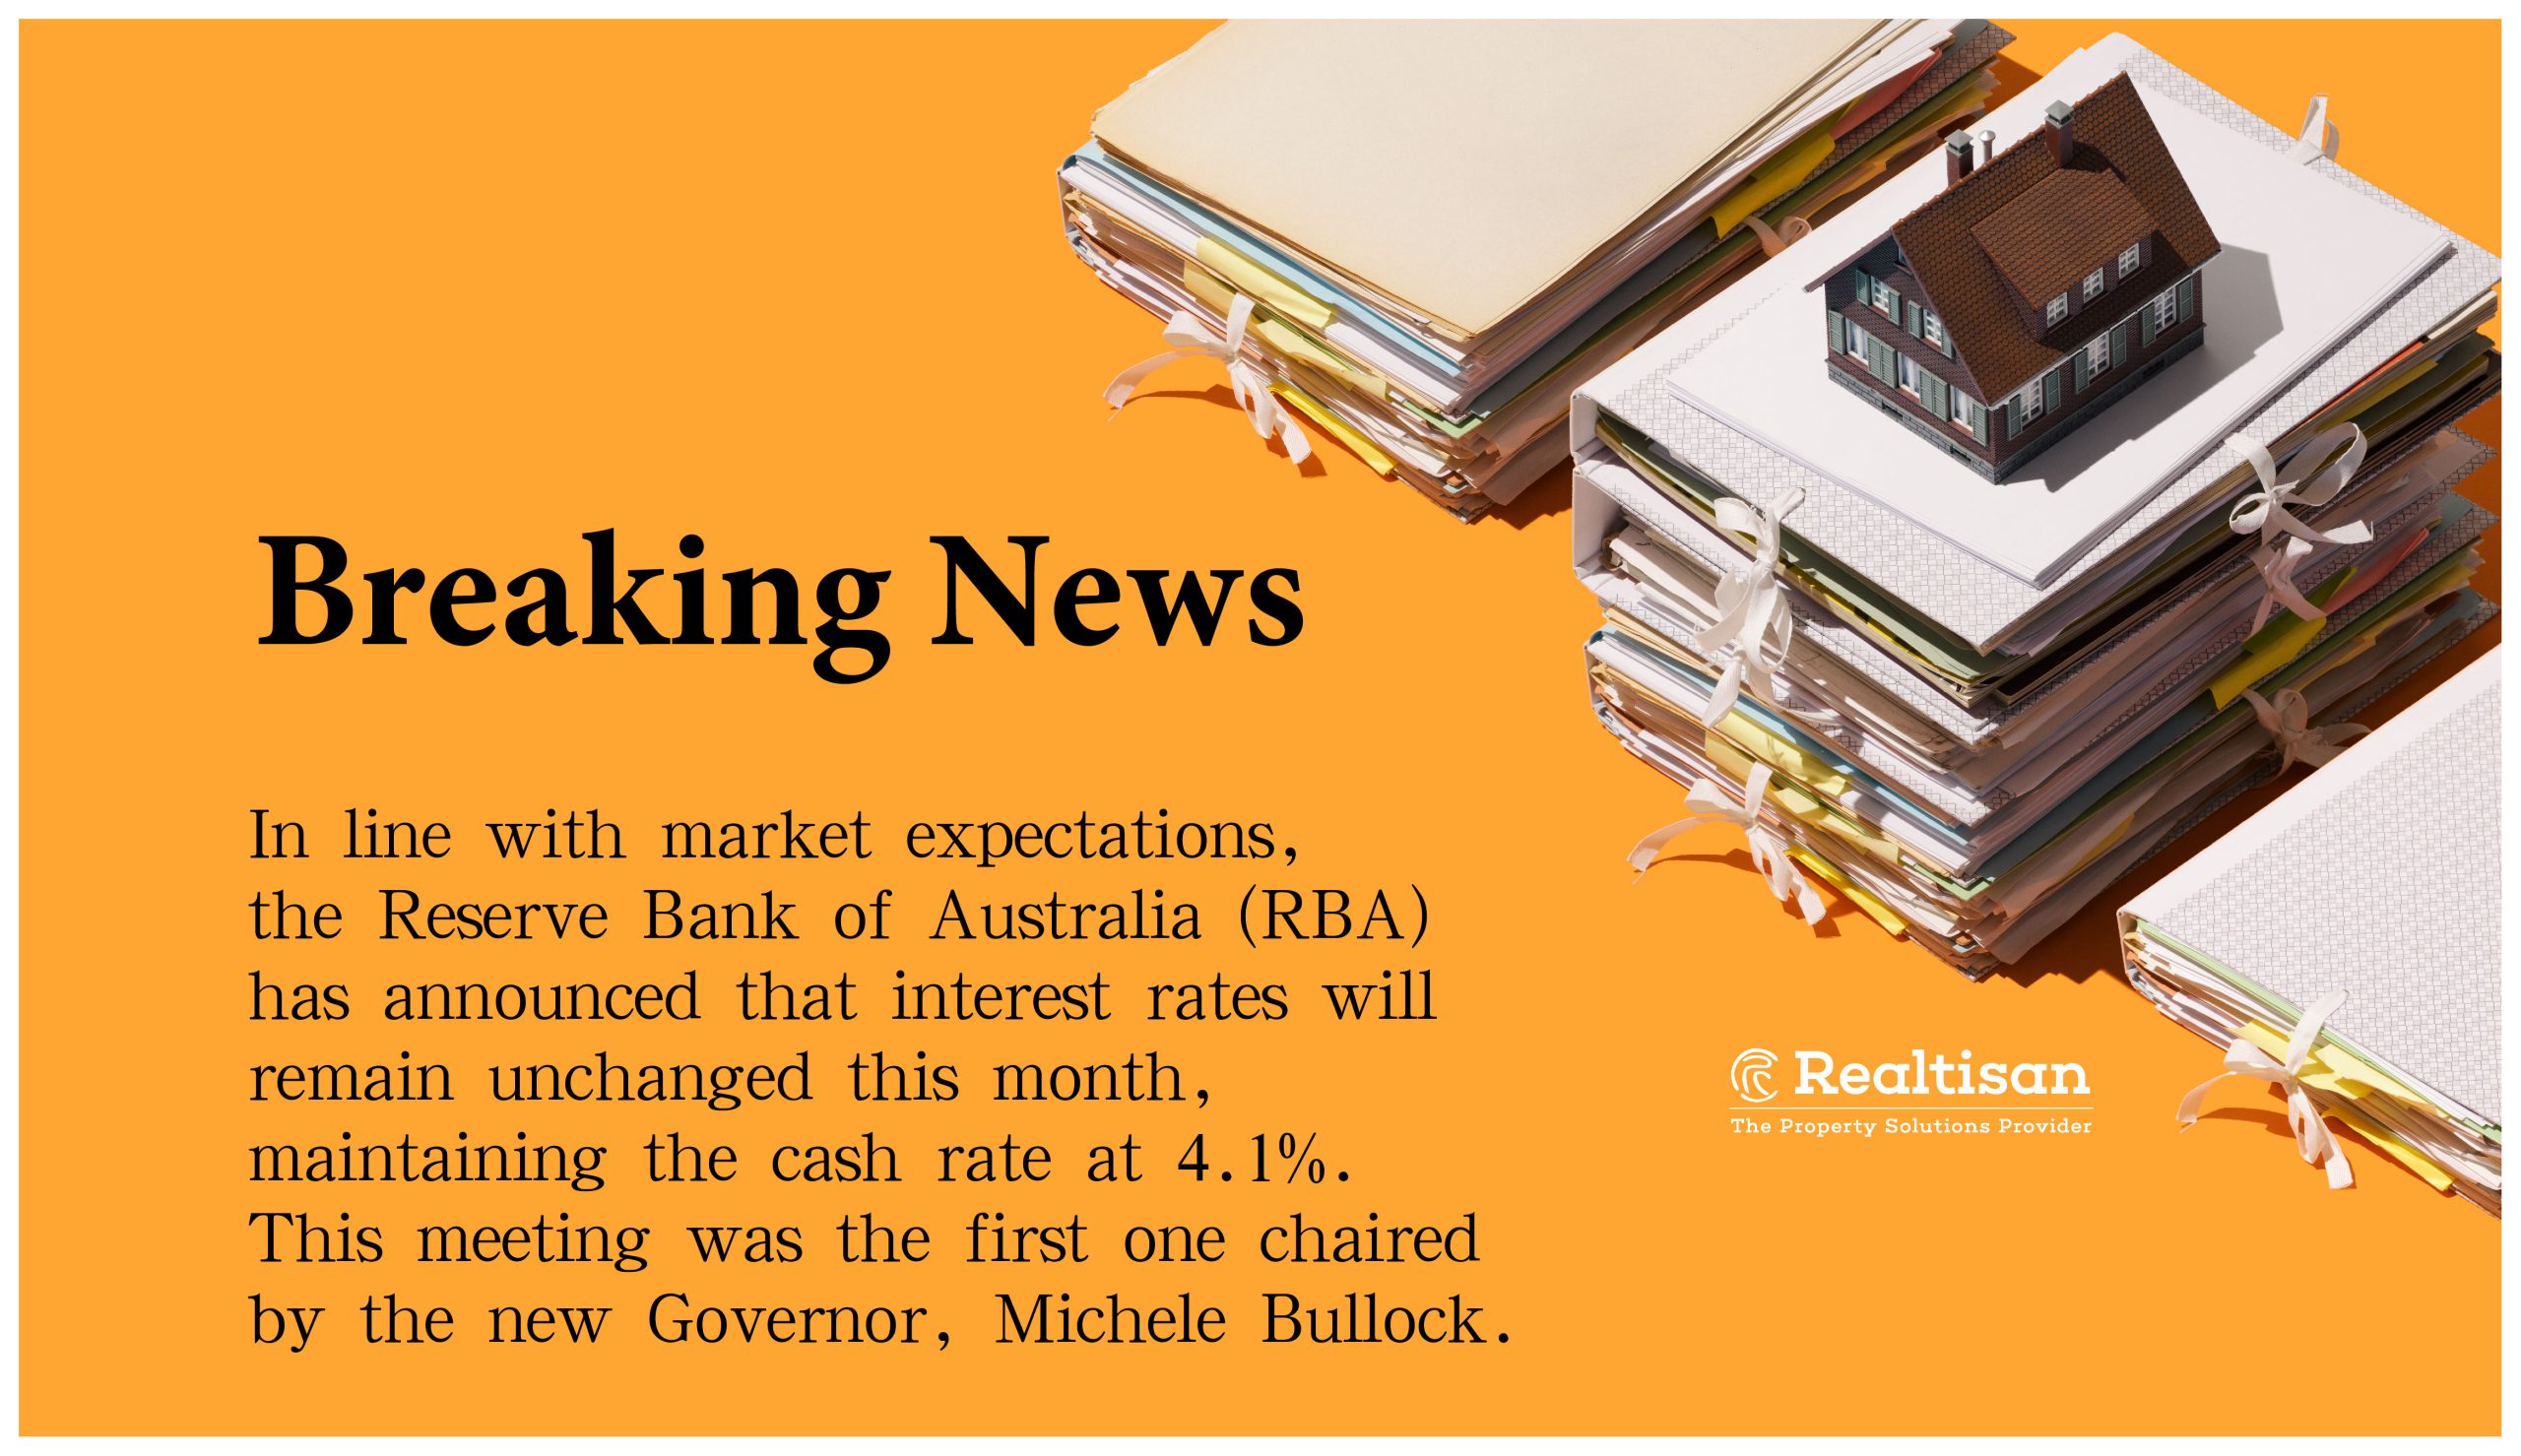 Hold on to Rate Hikes! The Reserve Bank of Australia Announces Continued Cash Rate at 4.1% for October